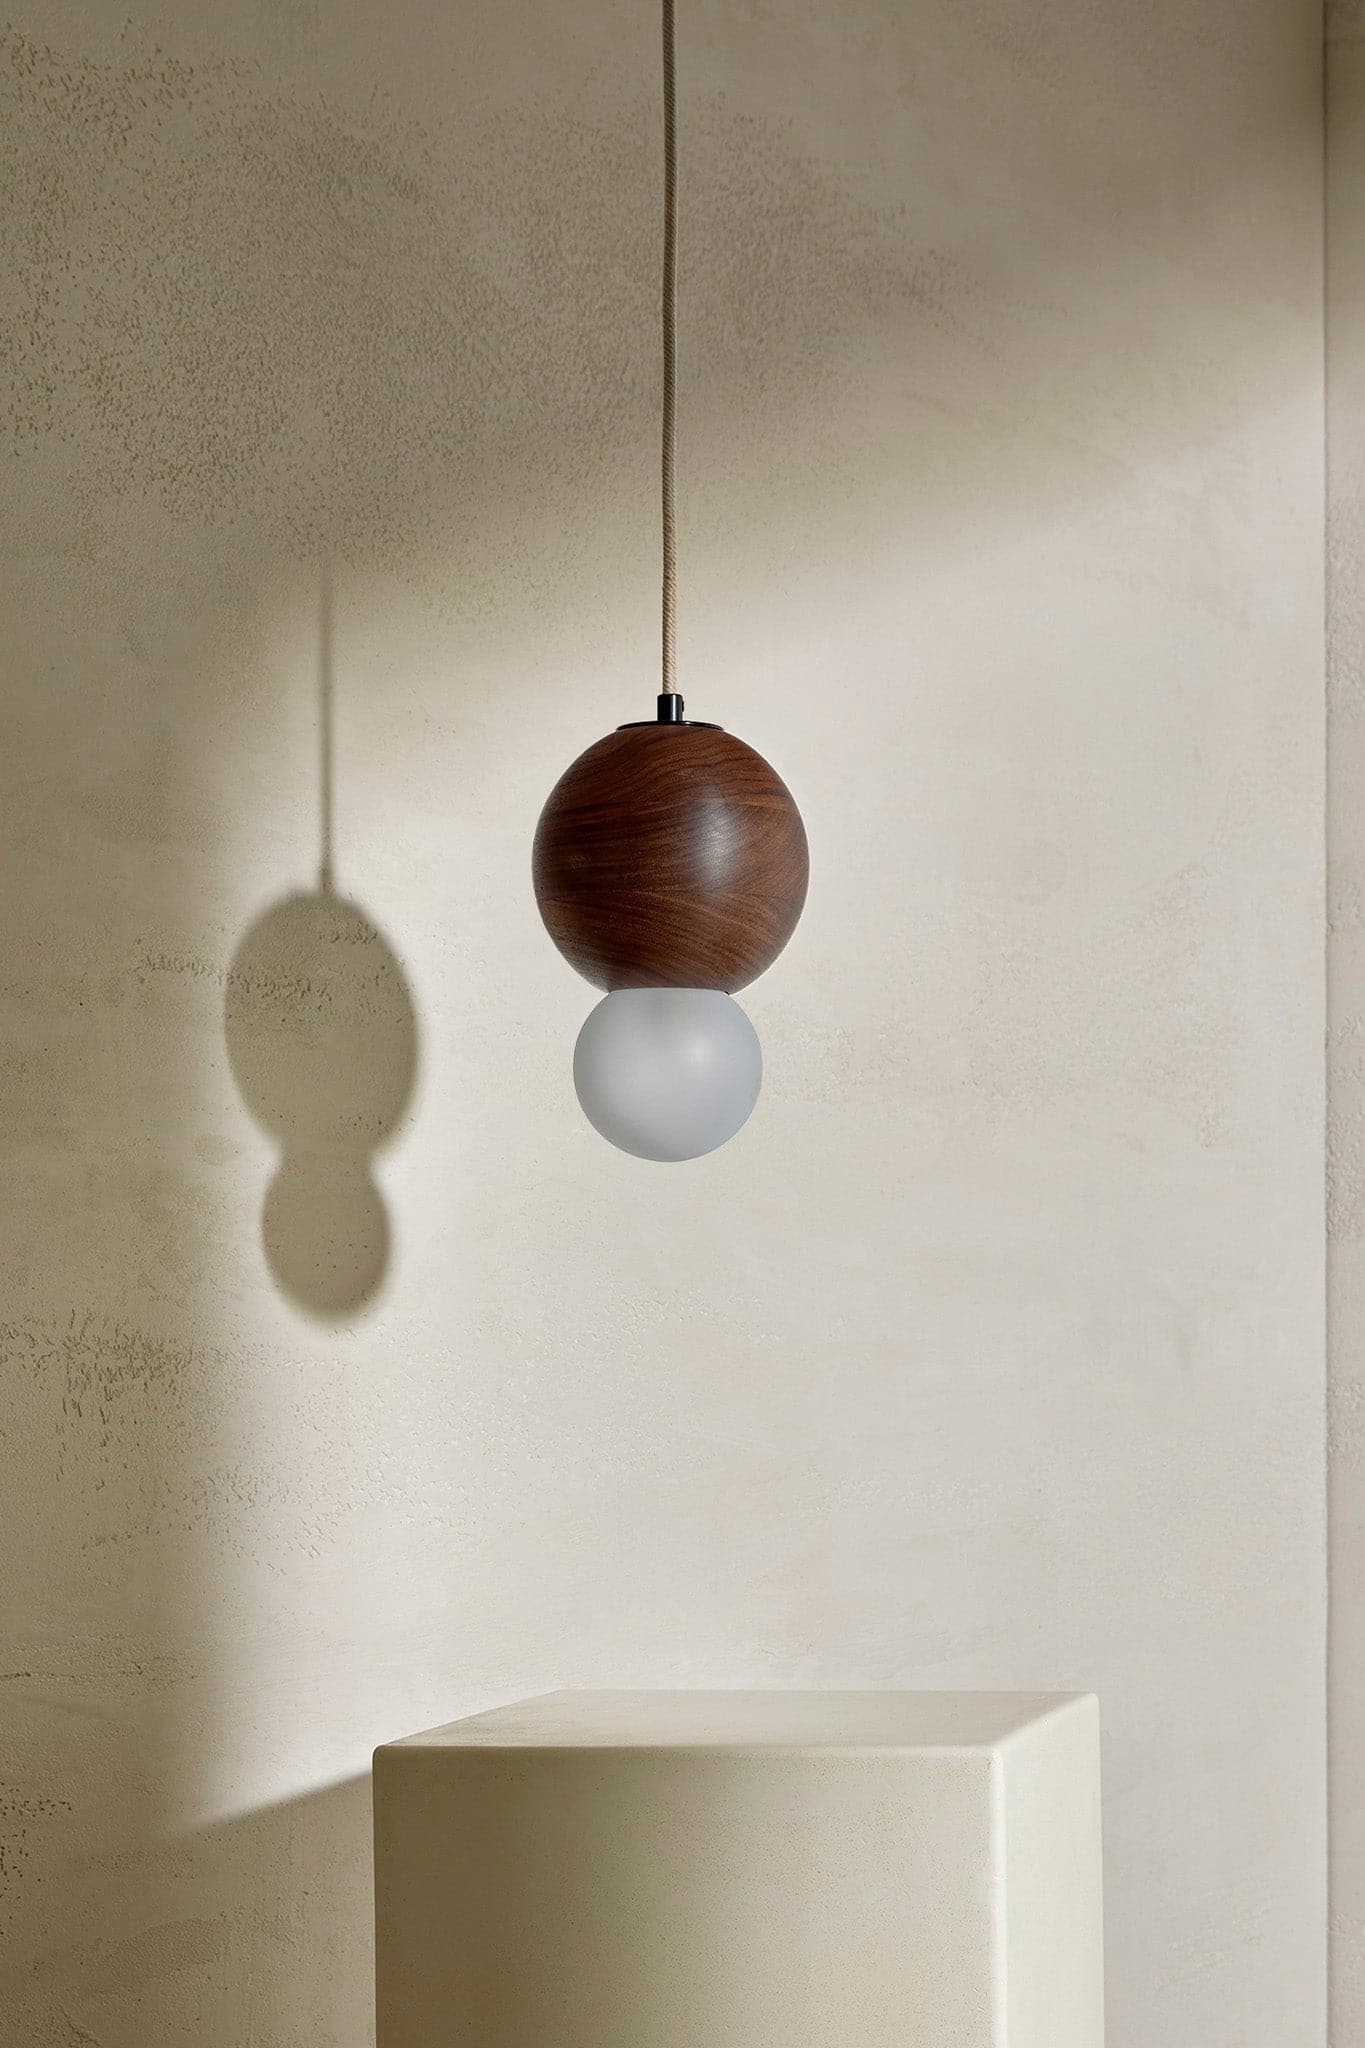 Marz Designs Bright Beads Sphere Pendant Light w/ Fabric in Brushed Black/Walnut